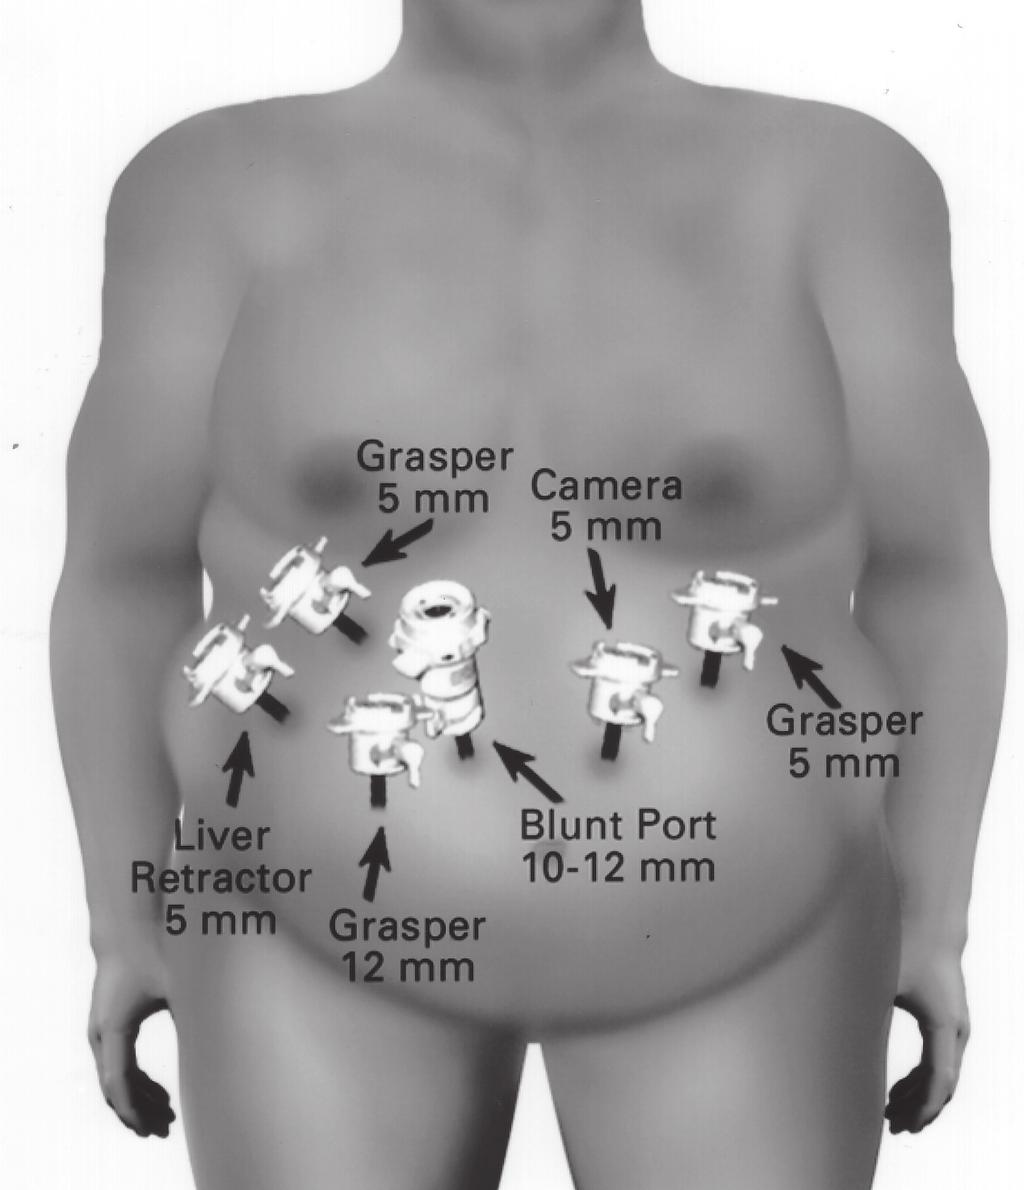 Laparoscopic Roux-en-Y Gastric Bypass for Recalcitrant Gastroesophageal Reflux Disease in Morbidly Obese Patient, Perry Y et al. from physician office scales or telephone interviews.